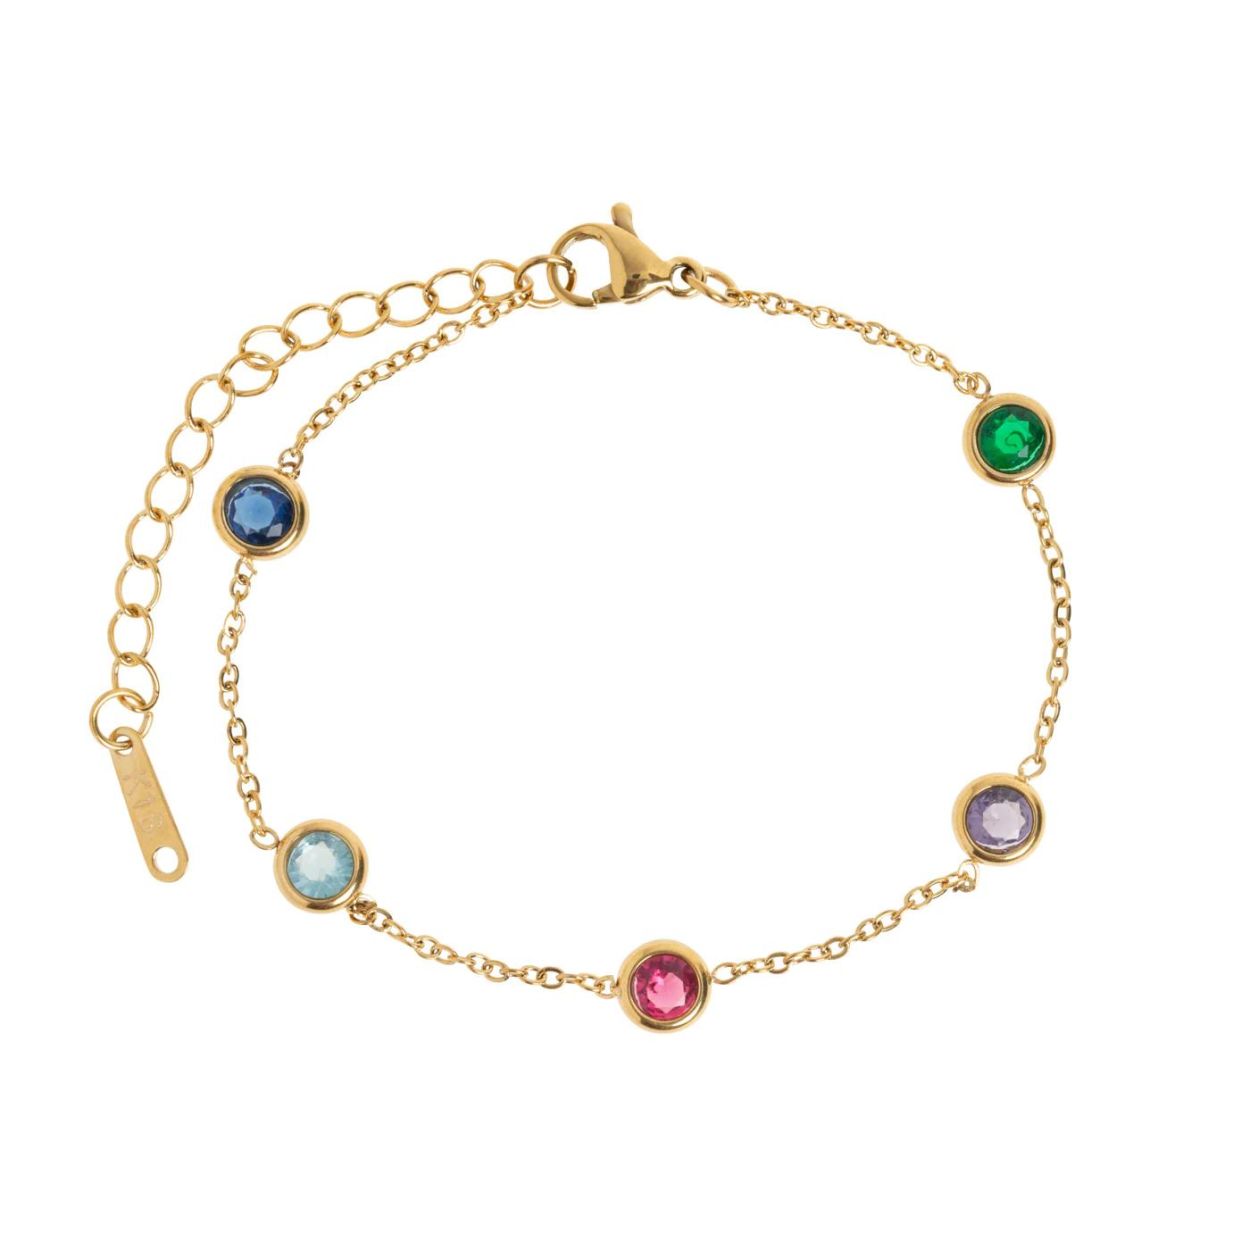 Timi of Sweden Michelle - Multi Colored Crystal Chain B (84440) - WeekendMode